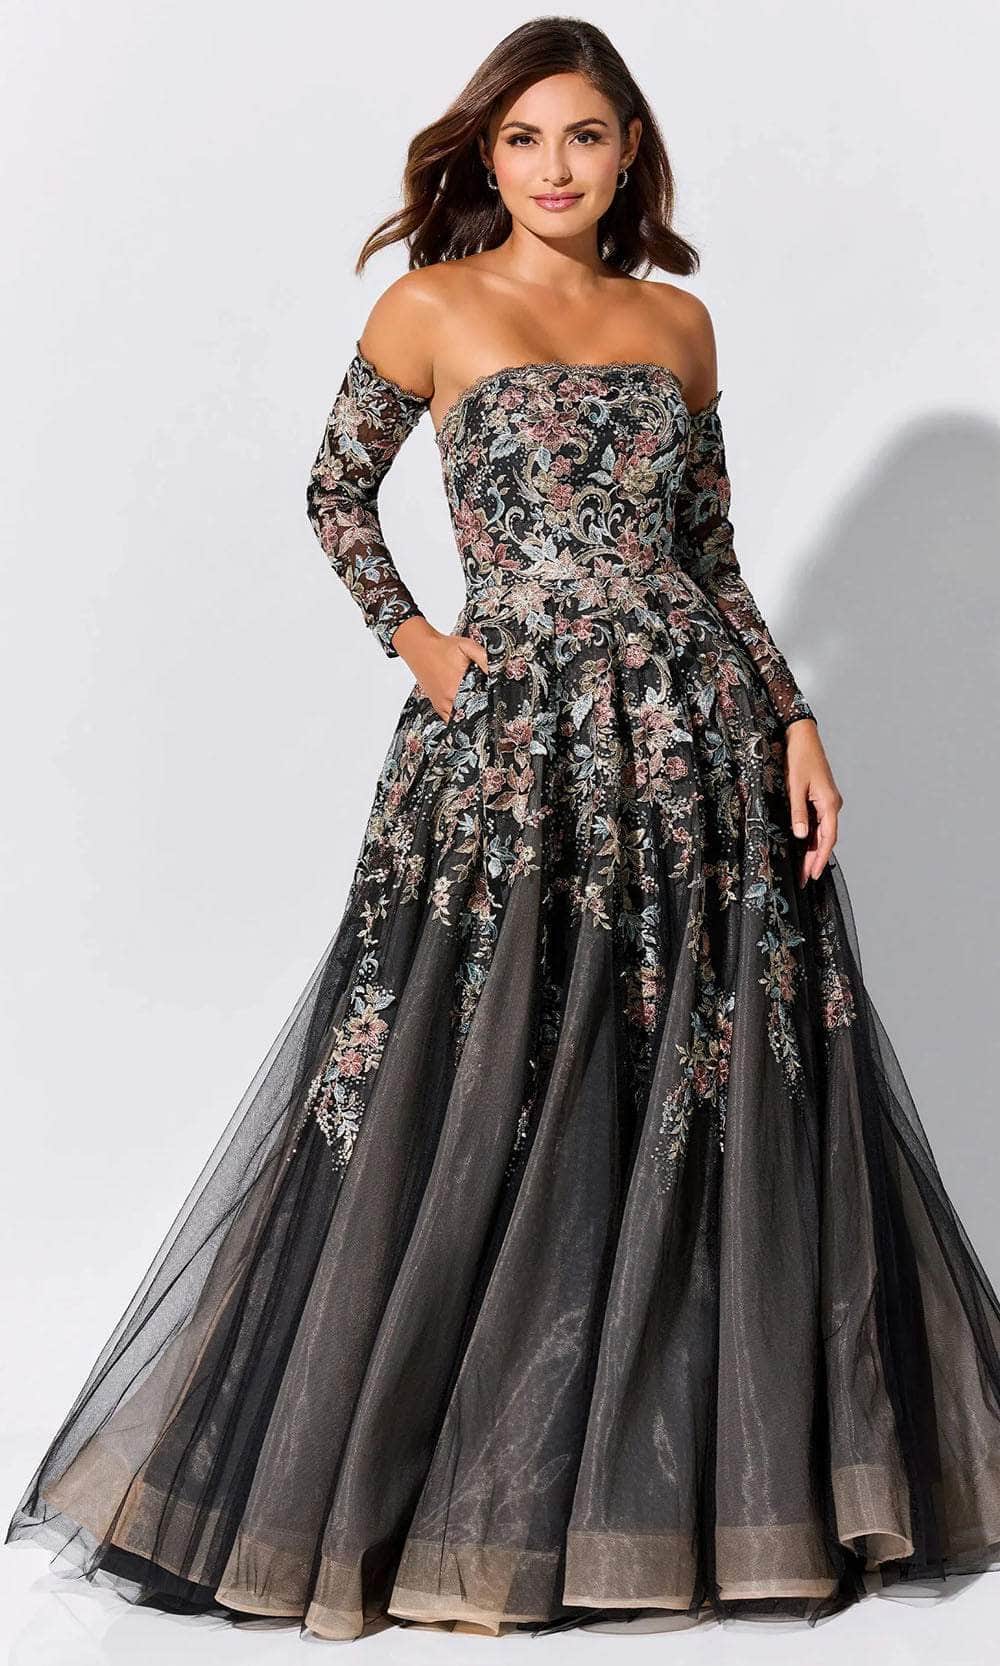 Image of Ivonne D ID327 - Sequin Embellished Strapless Prom Gown